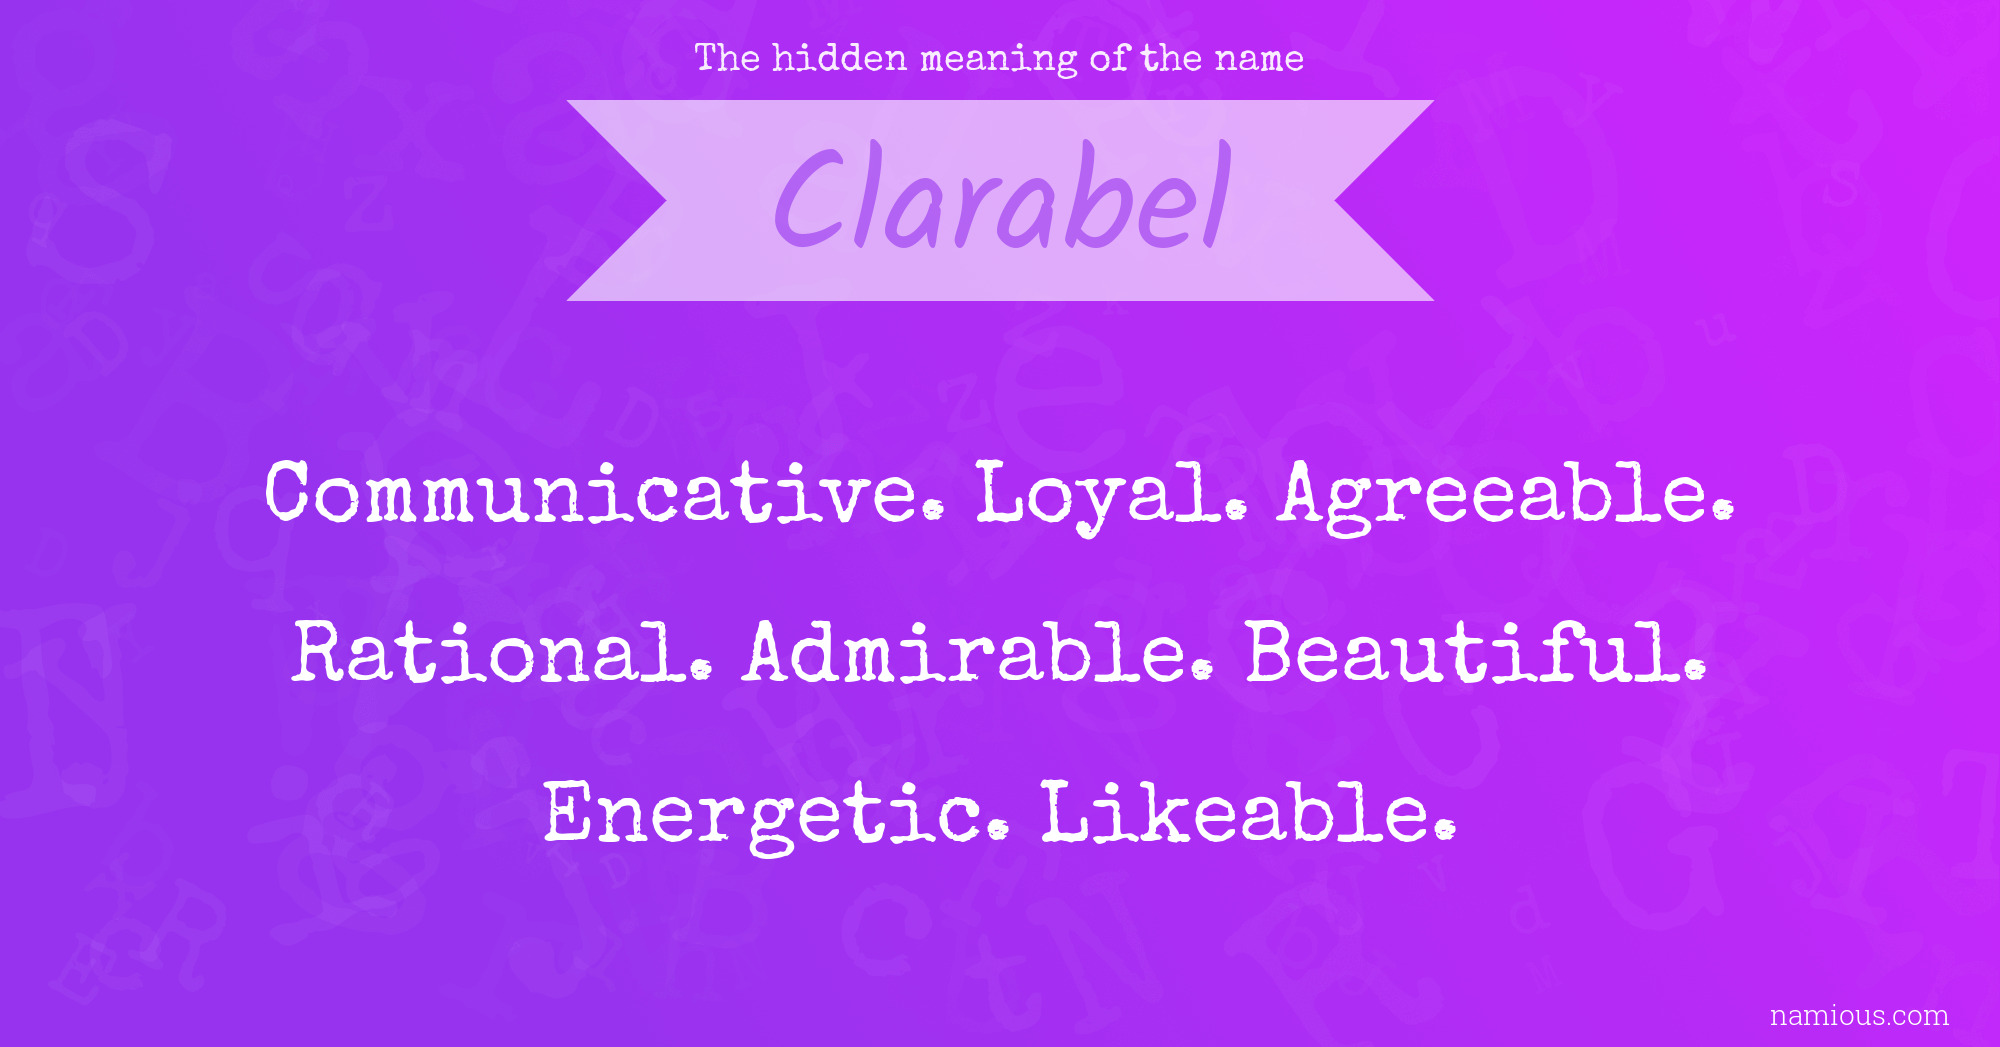 The hidden meaning of the name Clarabel